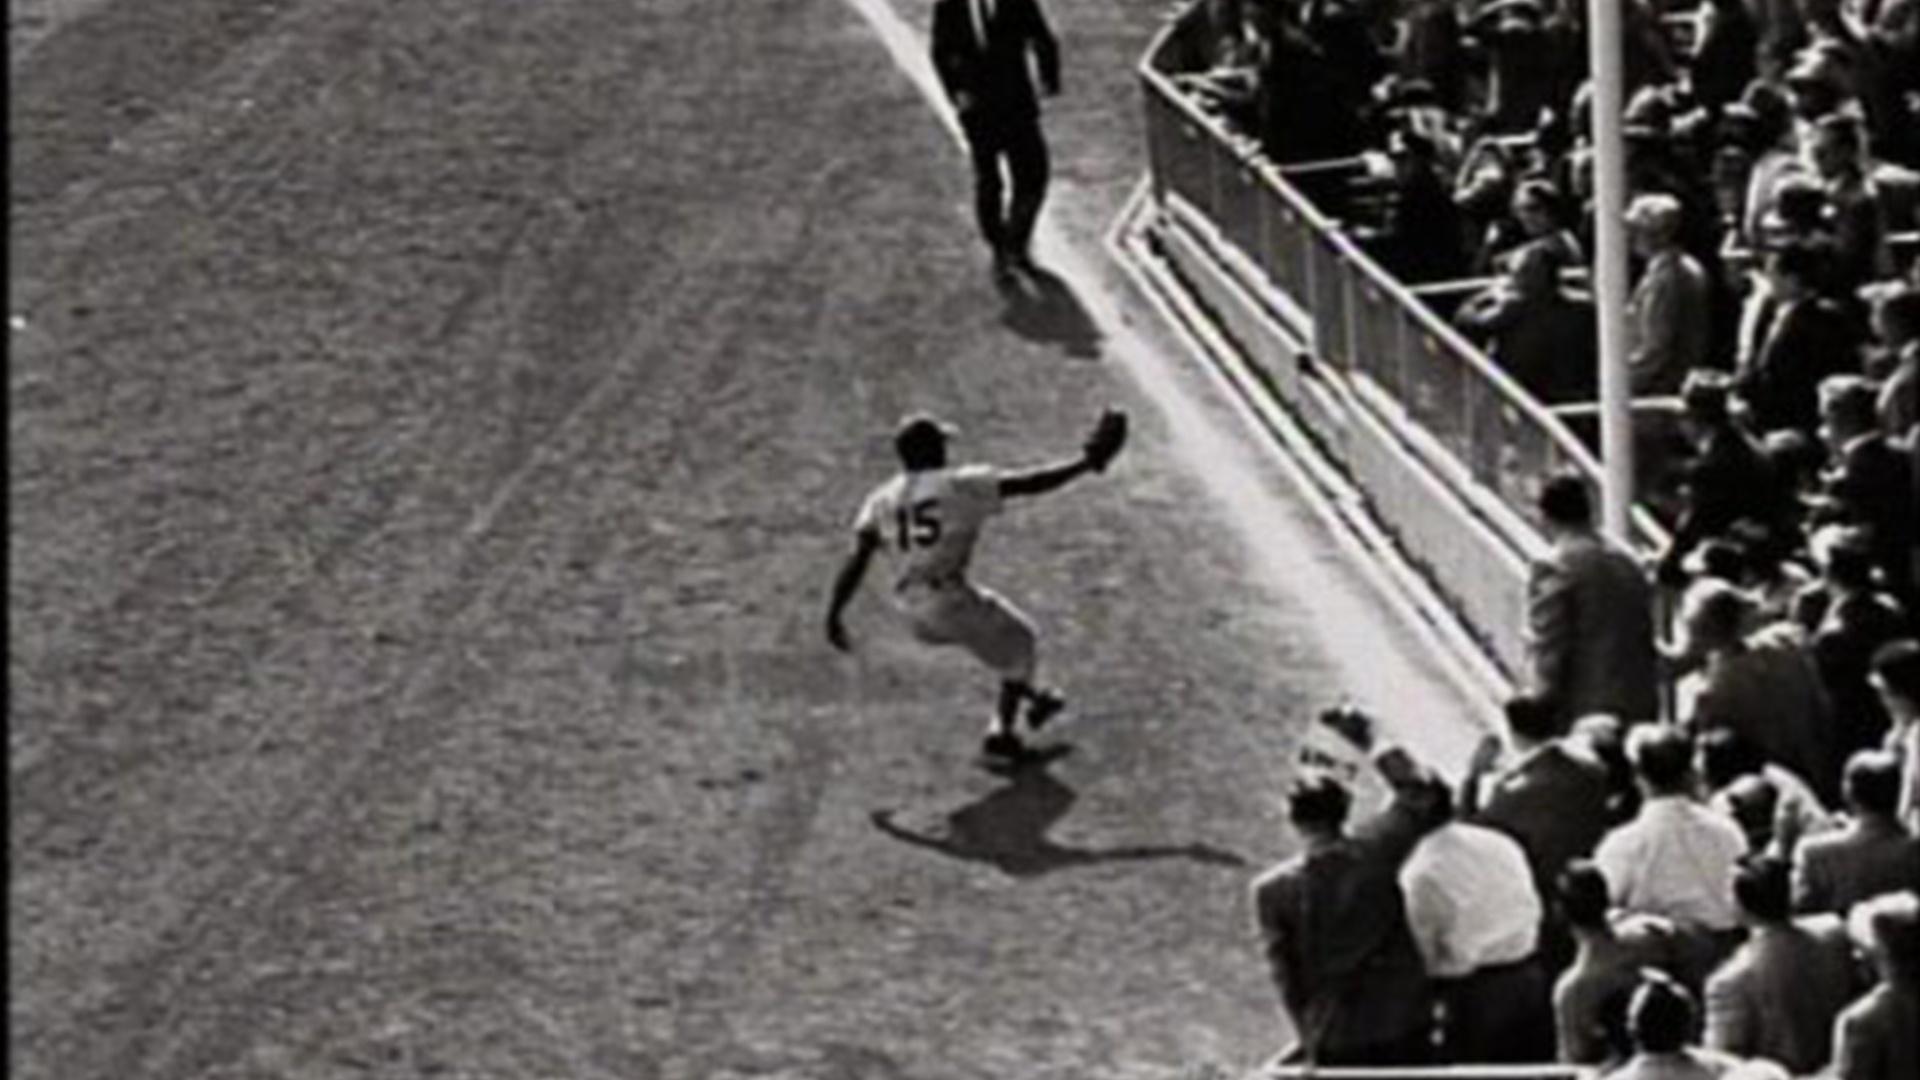 A baseball player on a field reaches out his glove to catch a fly ball.